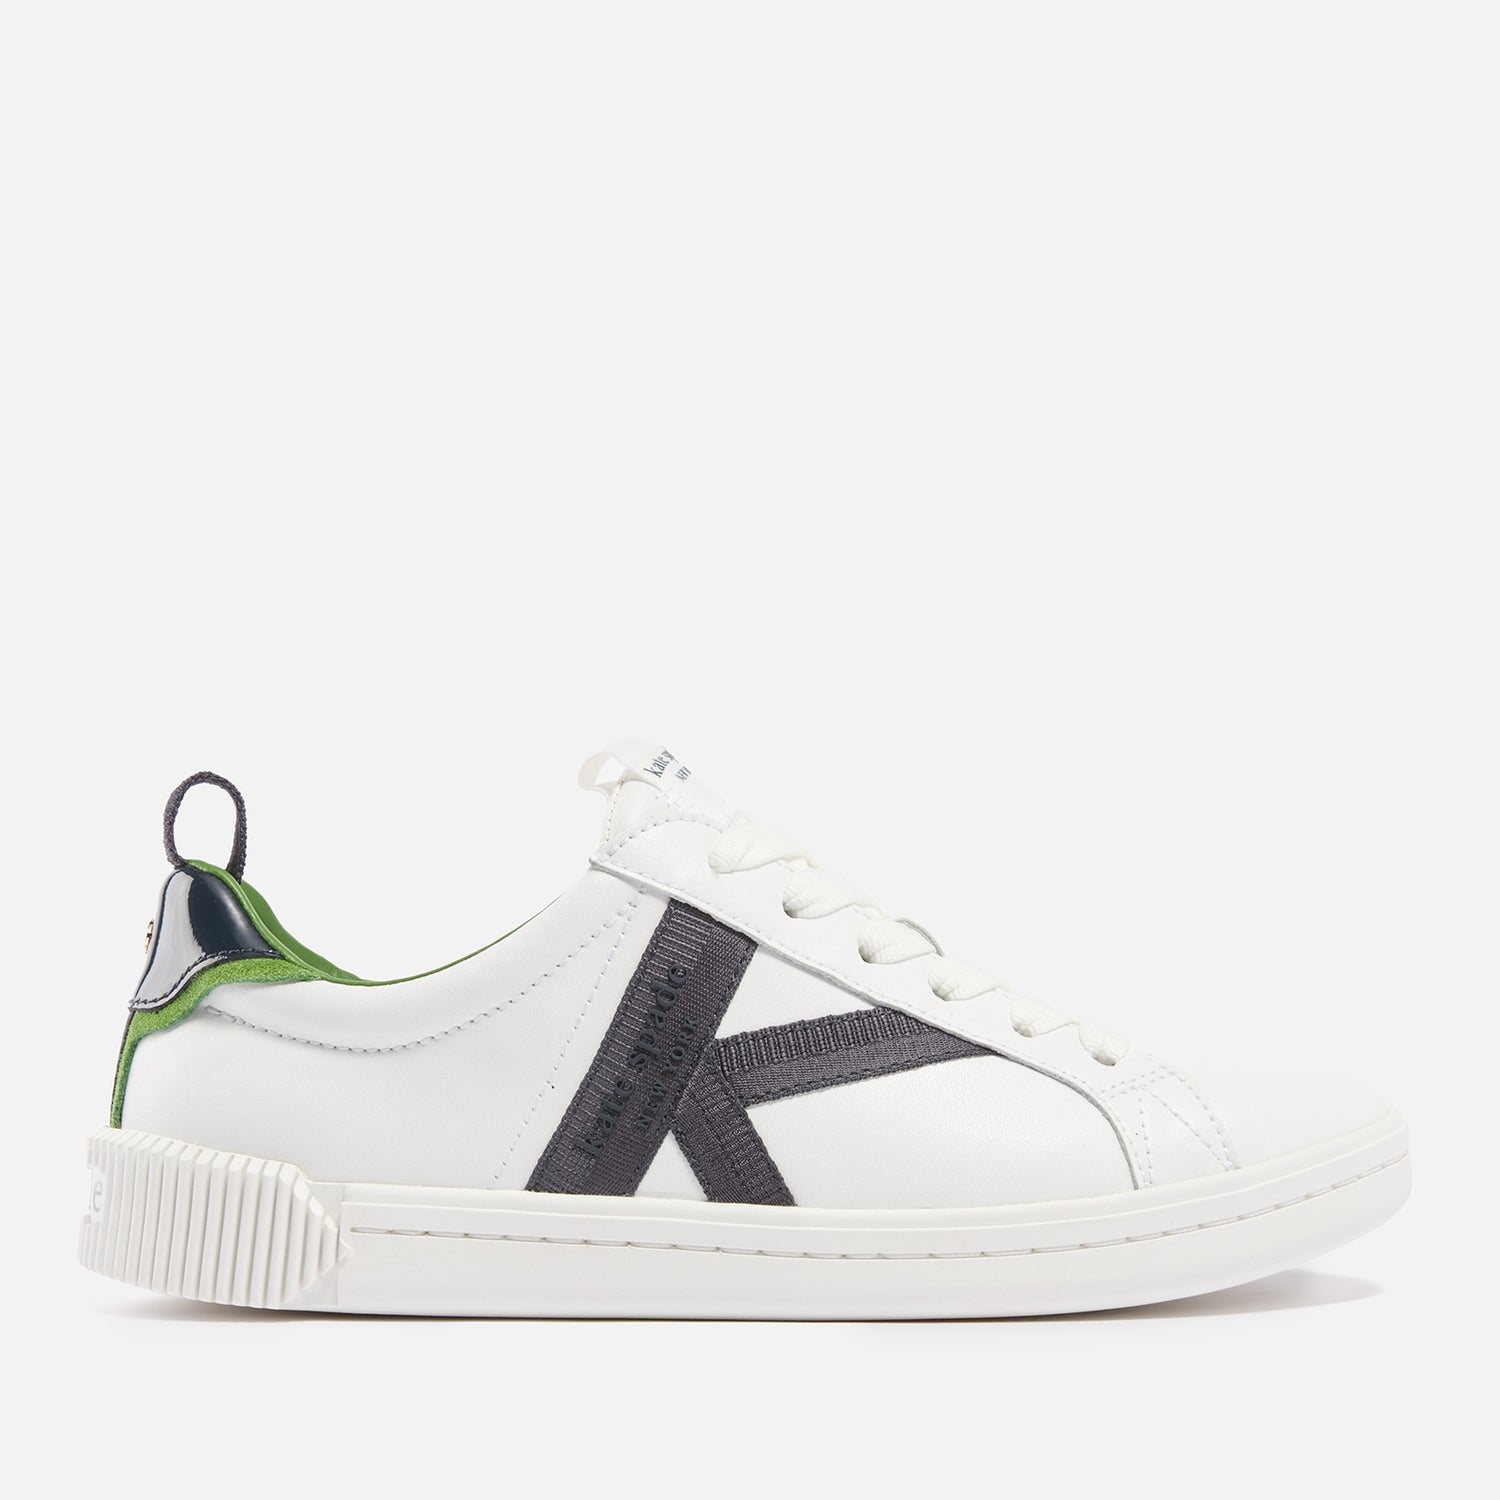 Kate Spade New York Women's Signature K Leather Cupsole Trainers - UK 4